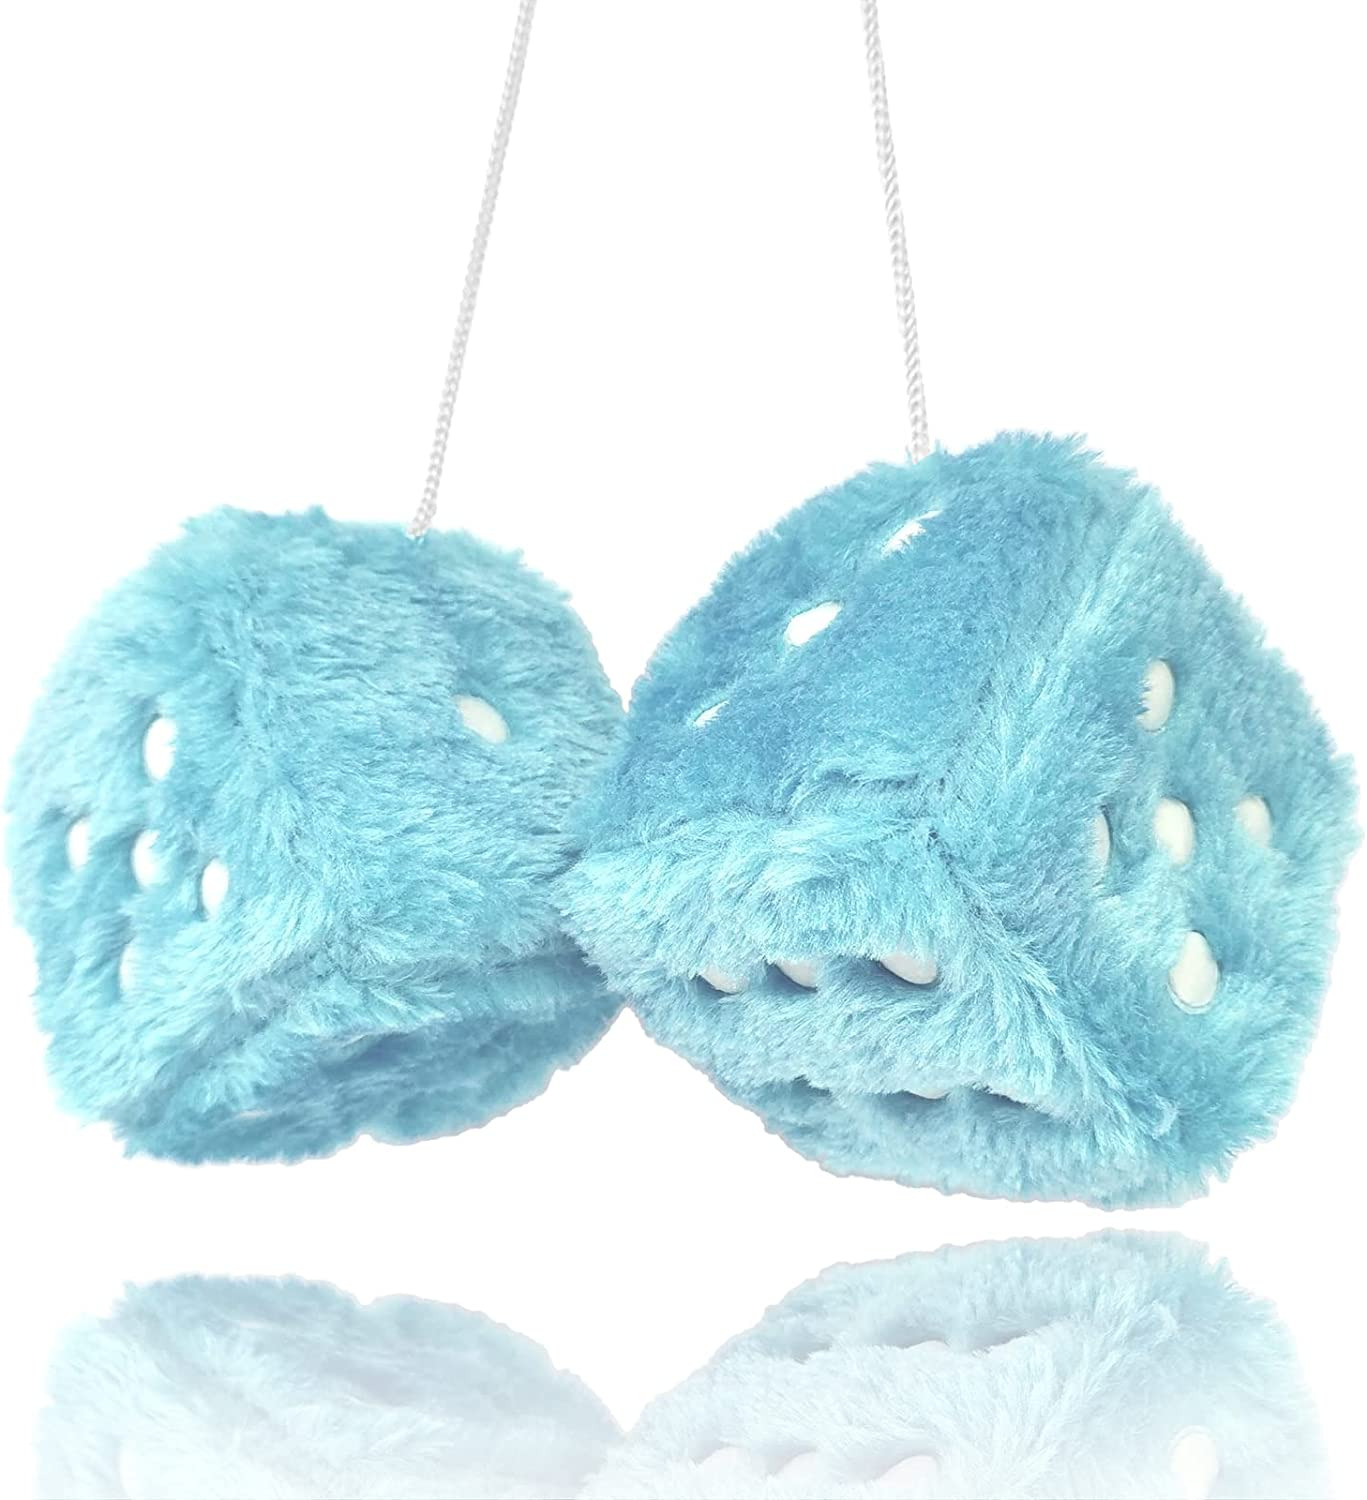 Pair 3” Light Blue with White Dots Mirror Fuzzy Plush Dice, Light White and Blac